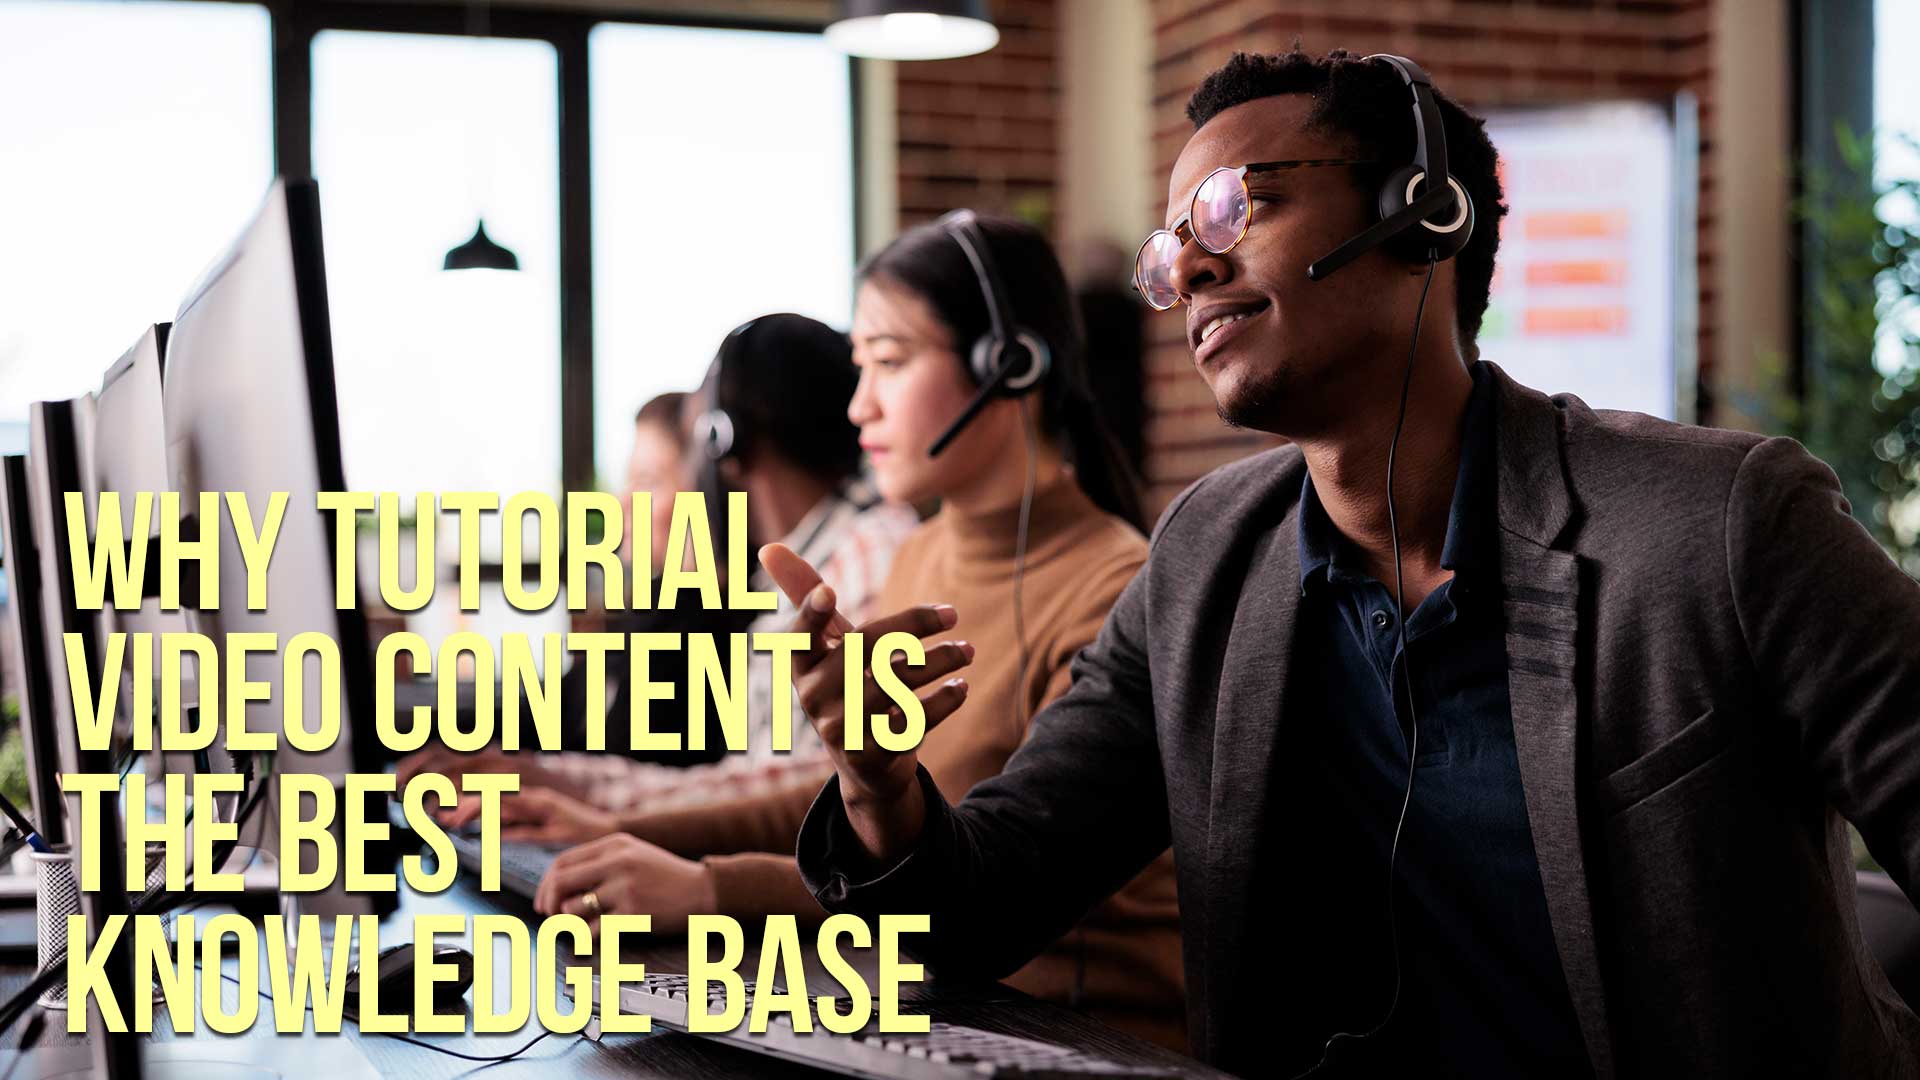 Why Tutorial Video Content Is the Best Knowledge Base